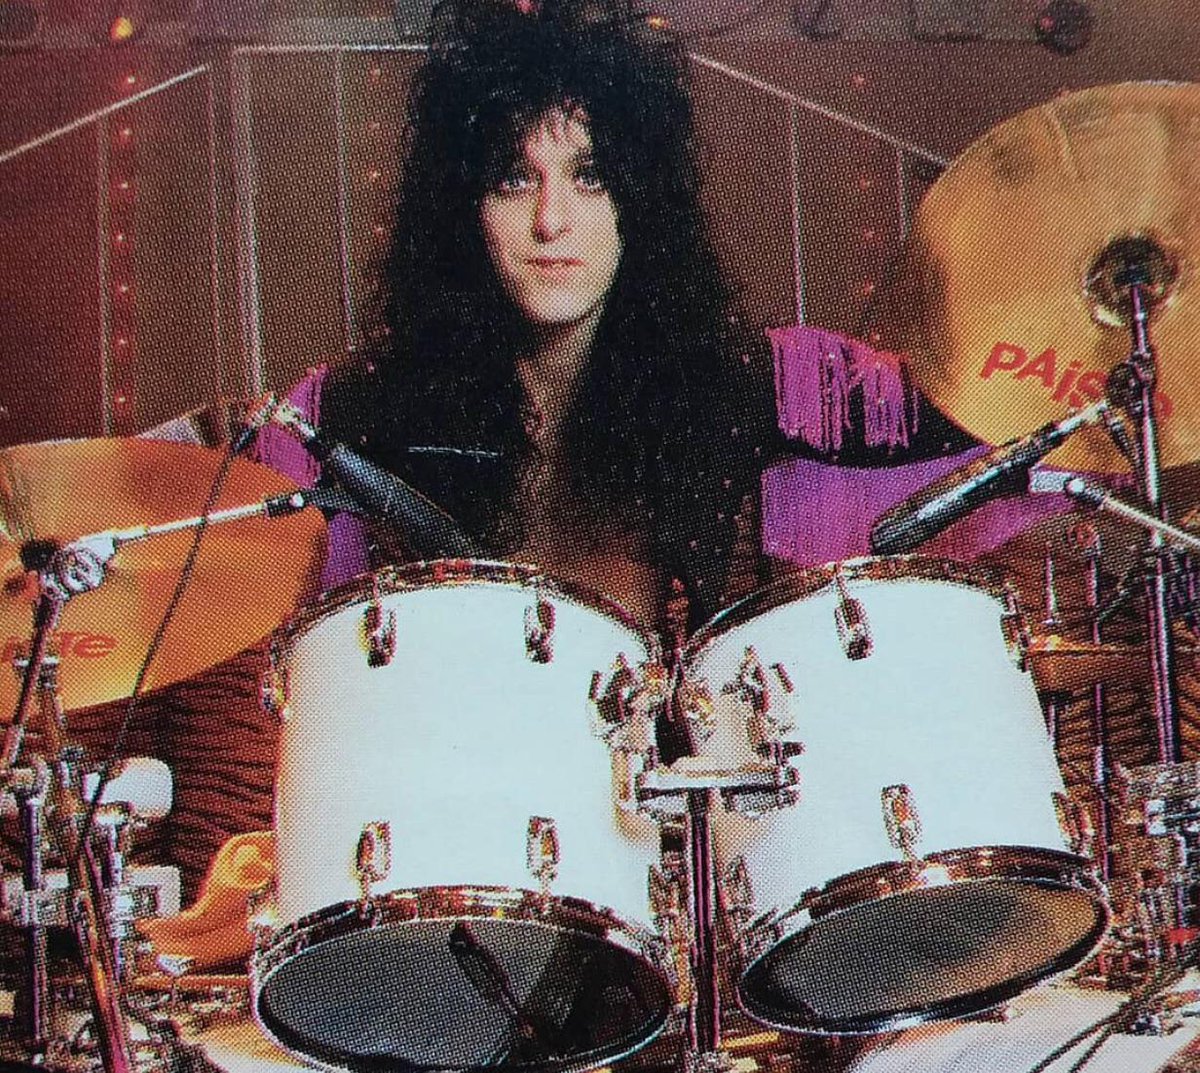 Former drummer for Keel, W.A.S.P. and L.A. Guns #SteveRiley has sadly died aged 67 🙏
#RestInPeace